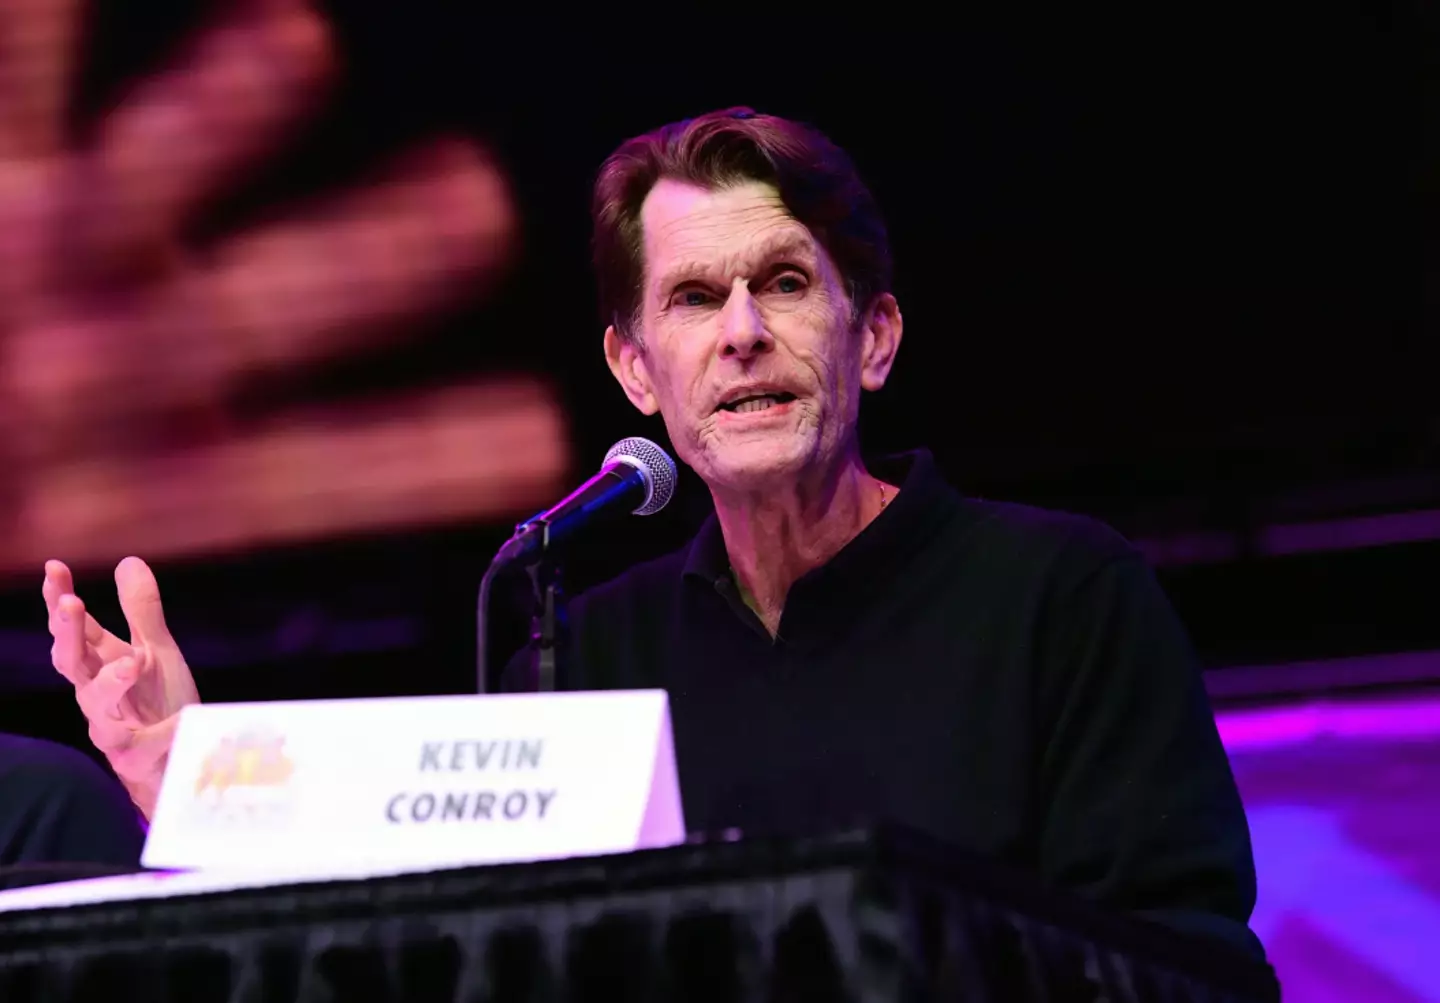 Kevin Conroy passed away in November 2022.